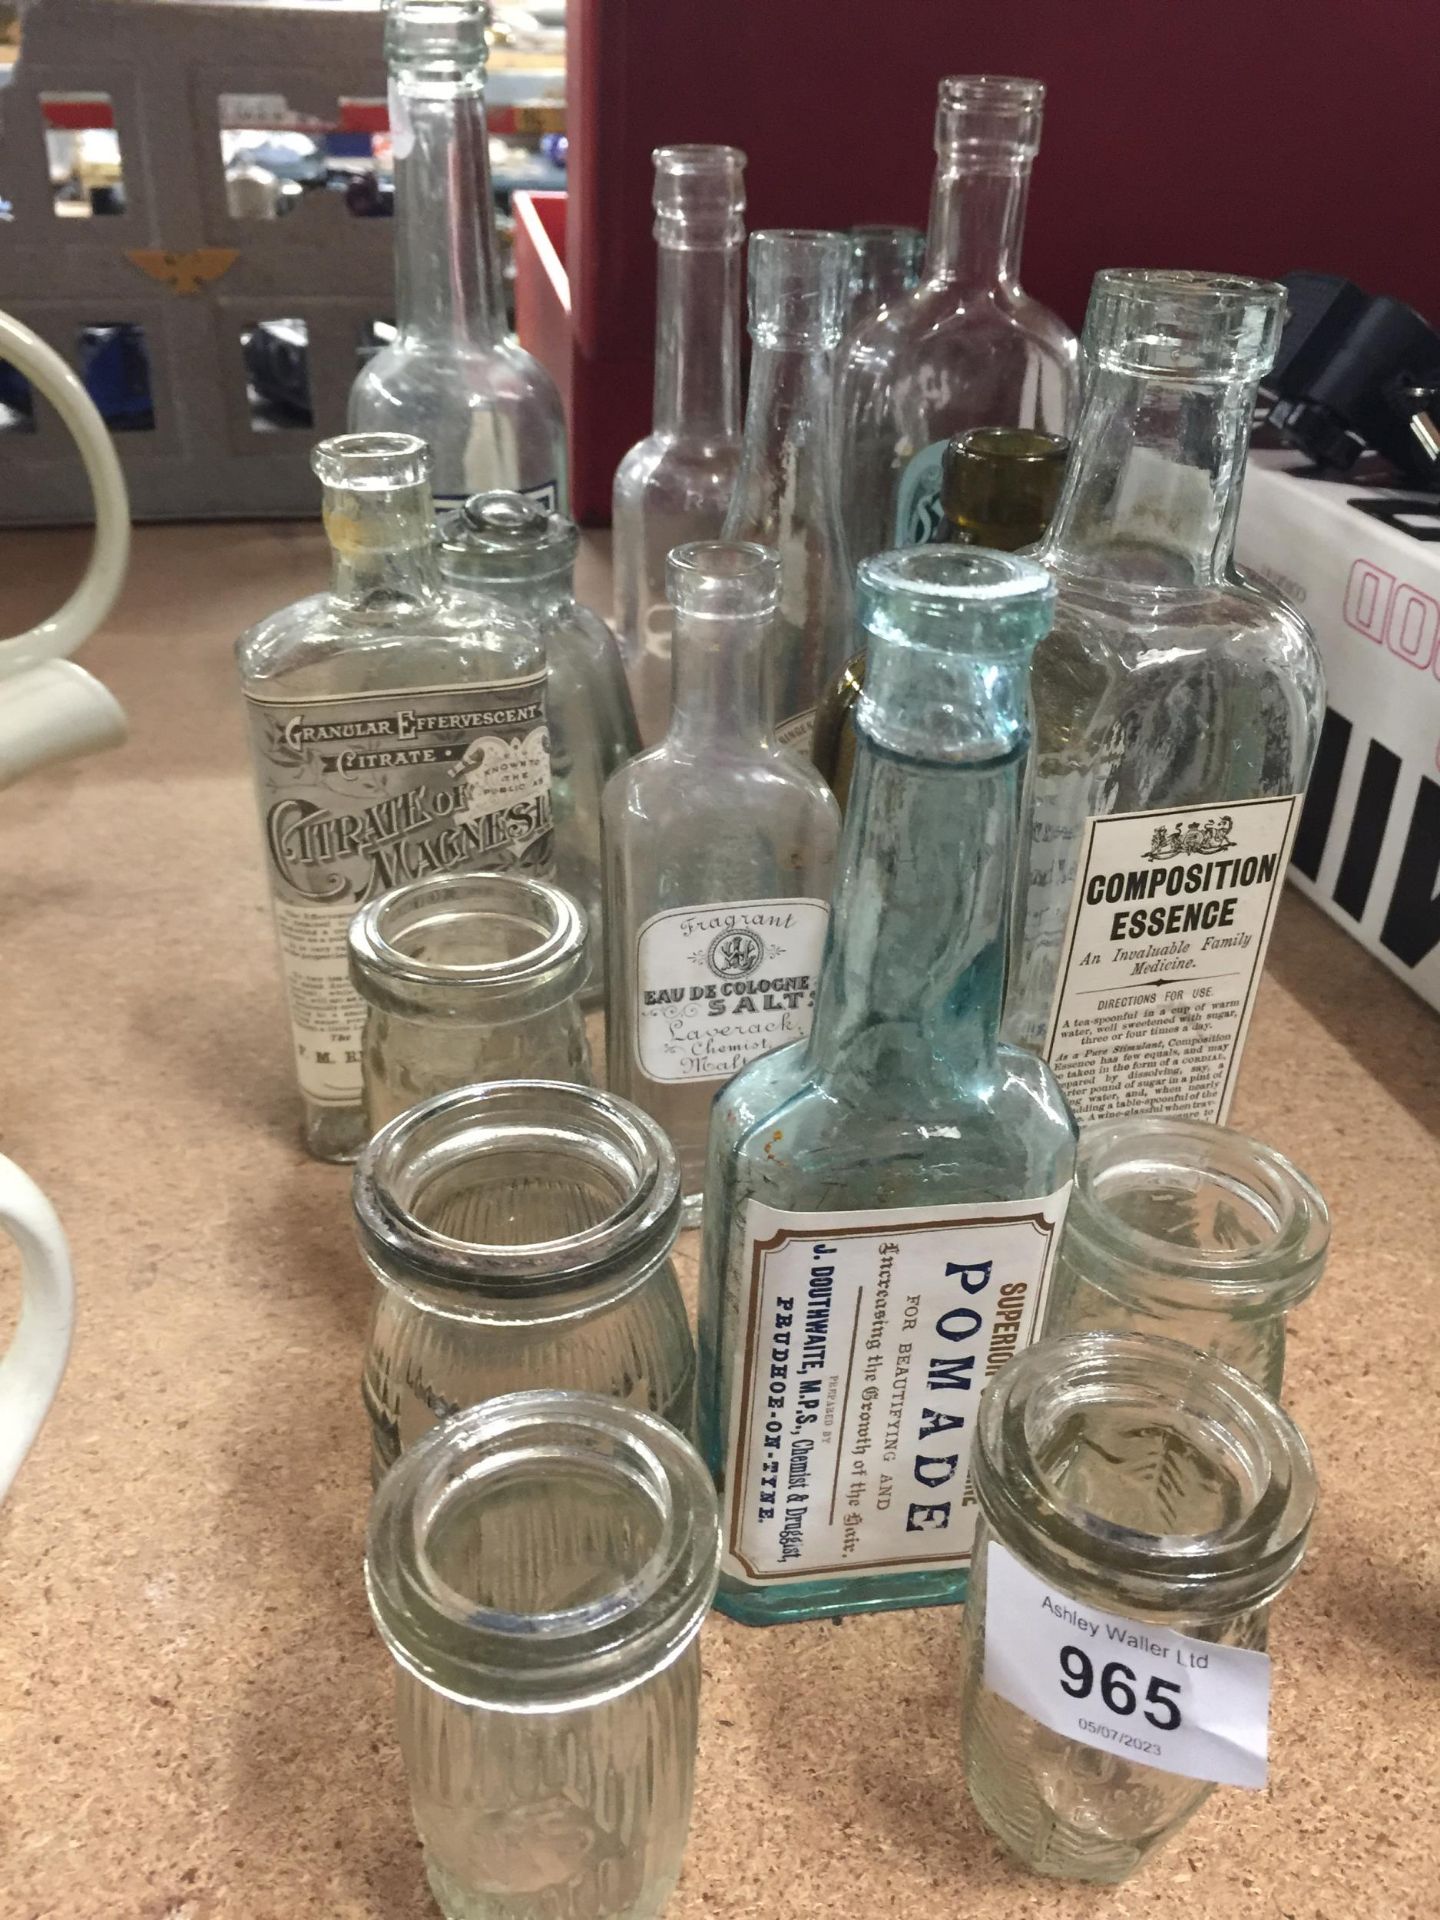 ACOLLECTION OF VINTAGE ADVERTISING BOTTLES TO INCLUDE OXO, LAVENDER WATER, SYRUP OF FIGS, ETC - Image 2 of 2